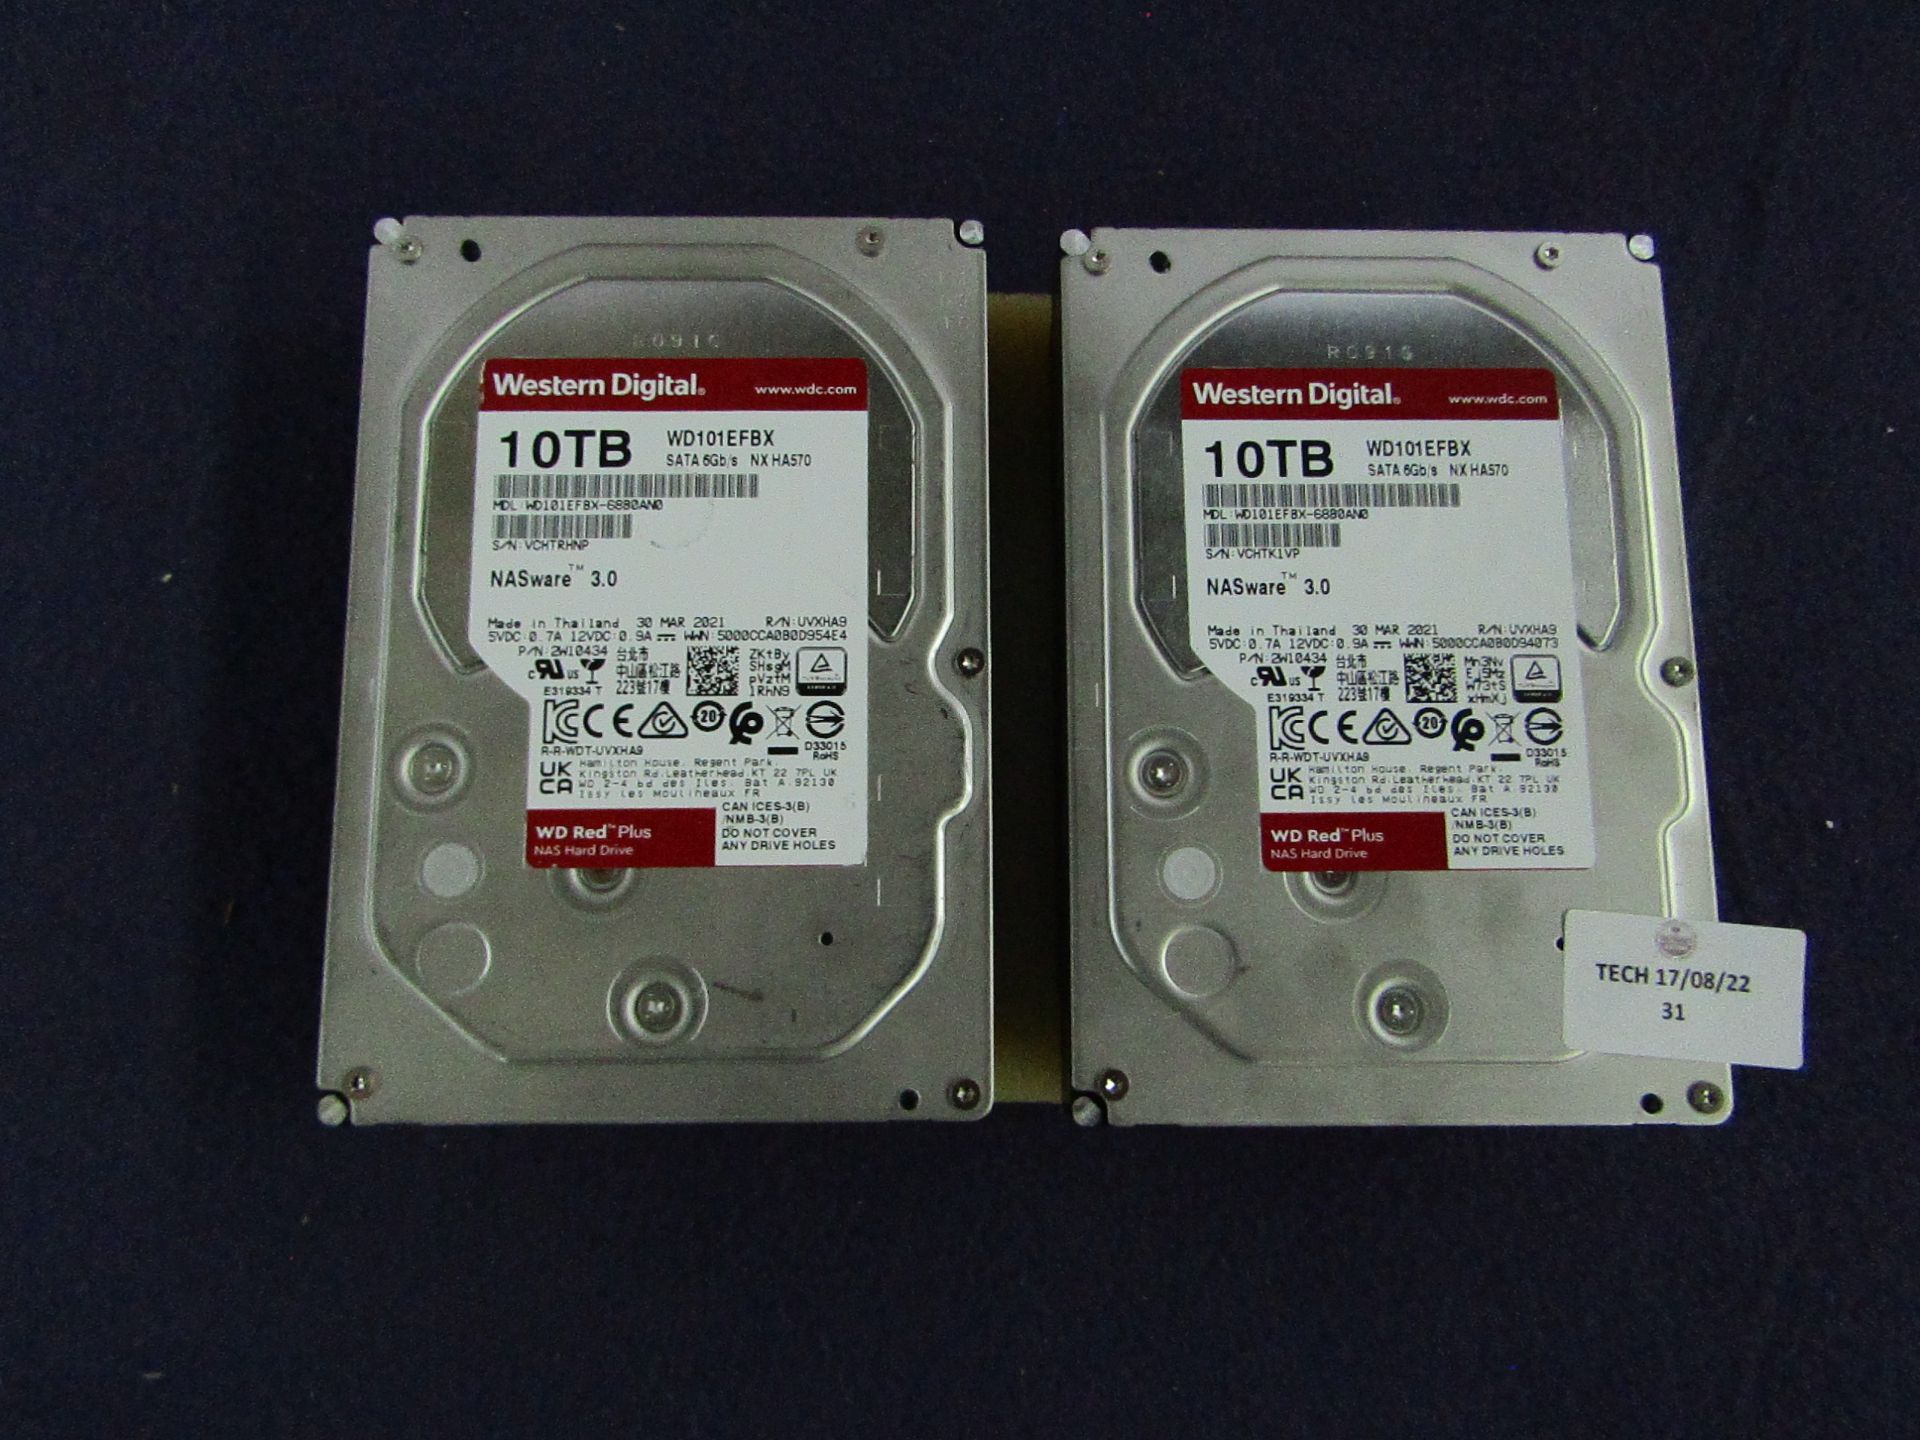 2x Western Digital - 10TB Hard Drive - Unchecked, No Packaging.